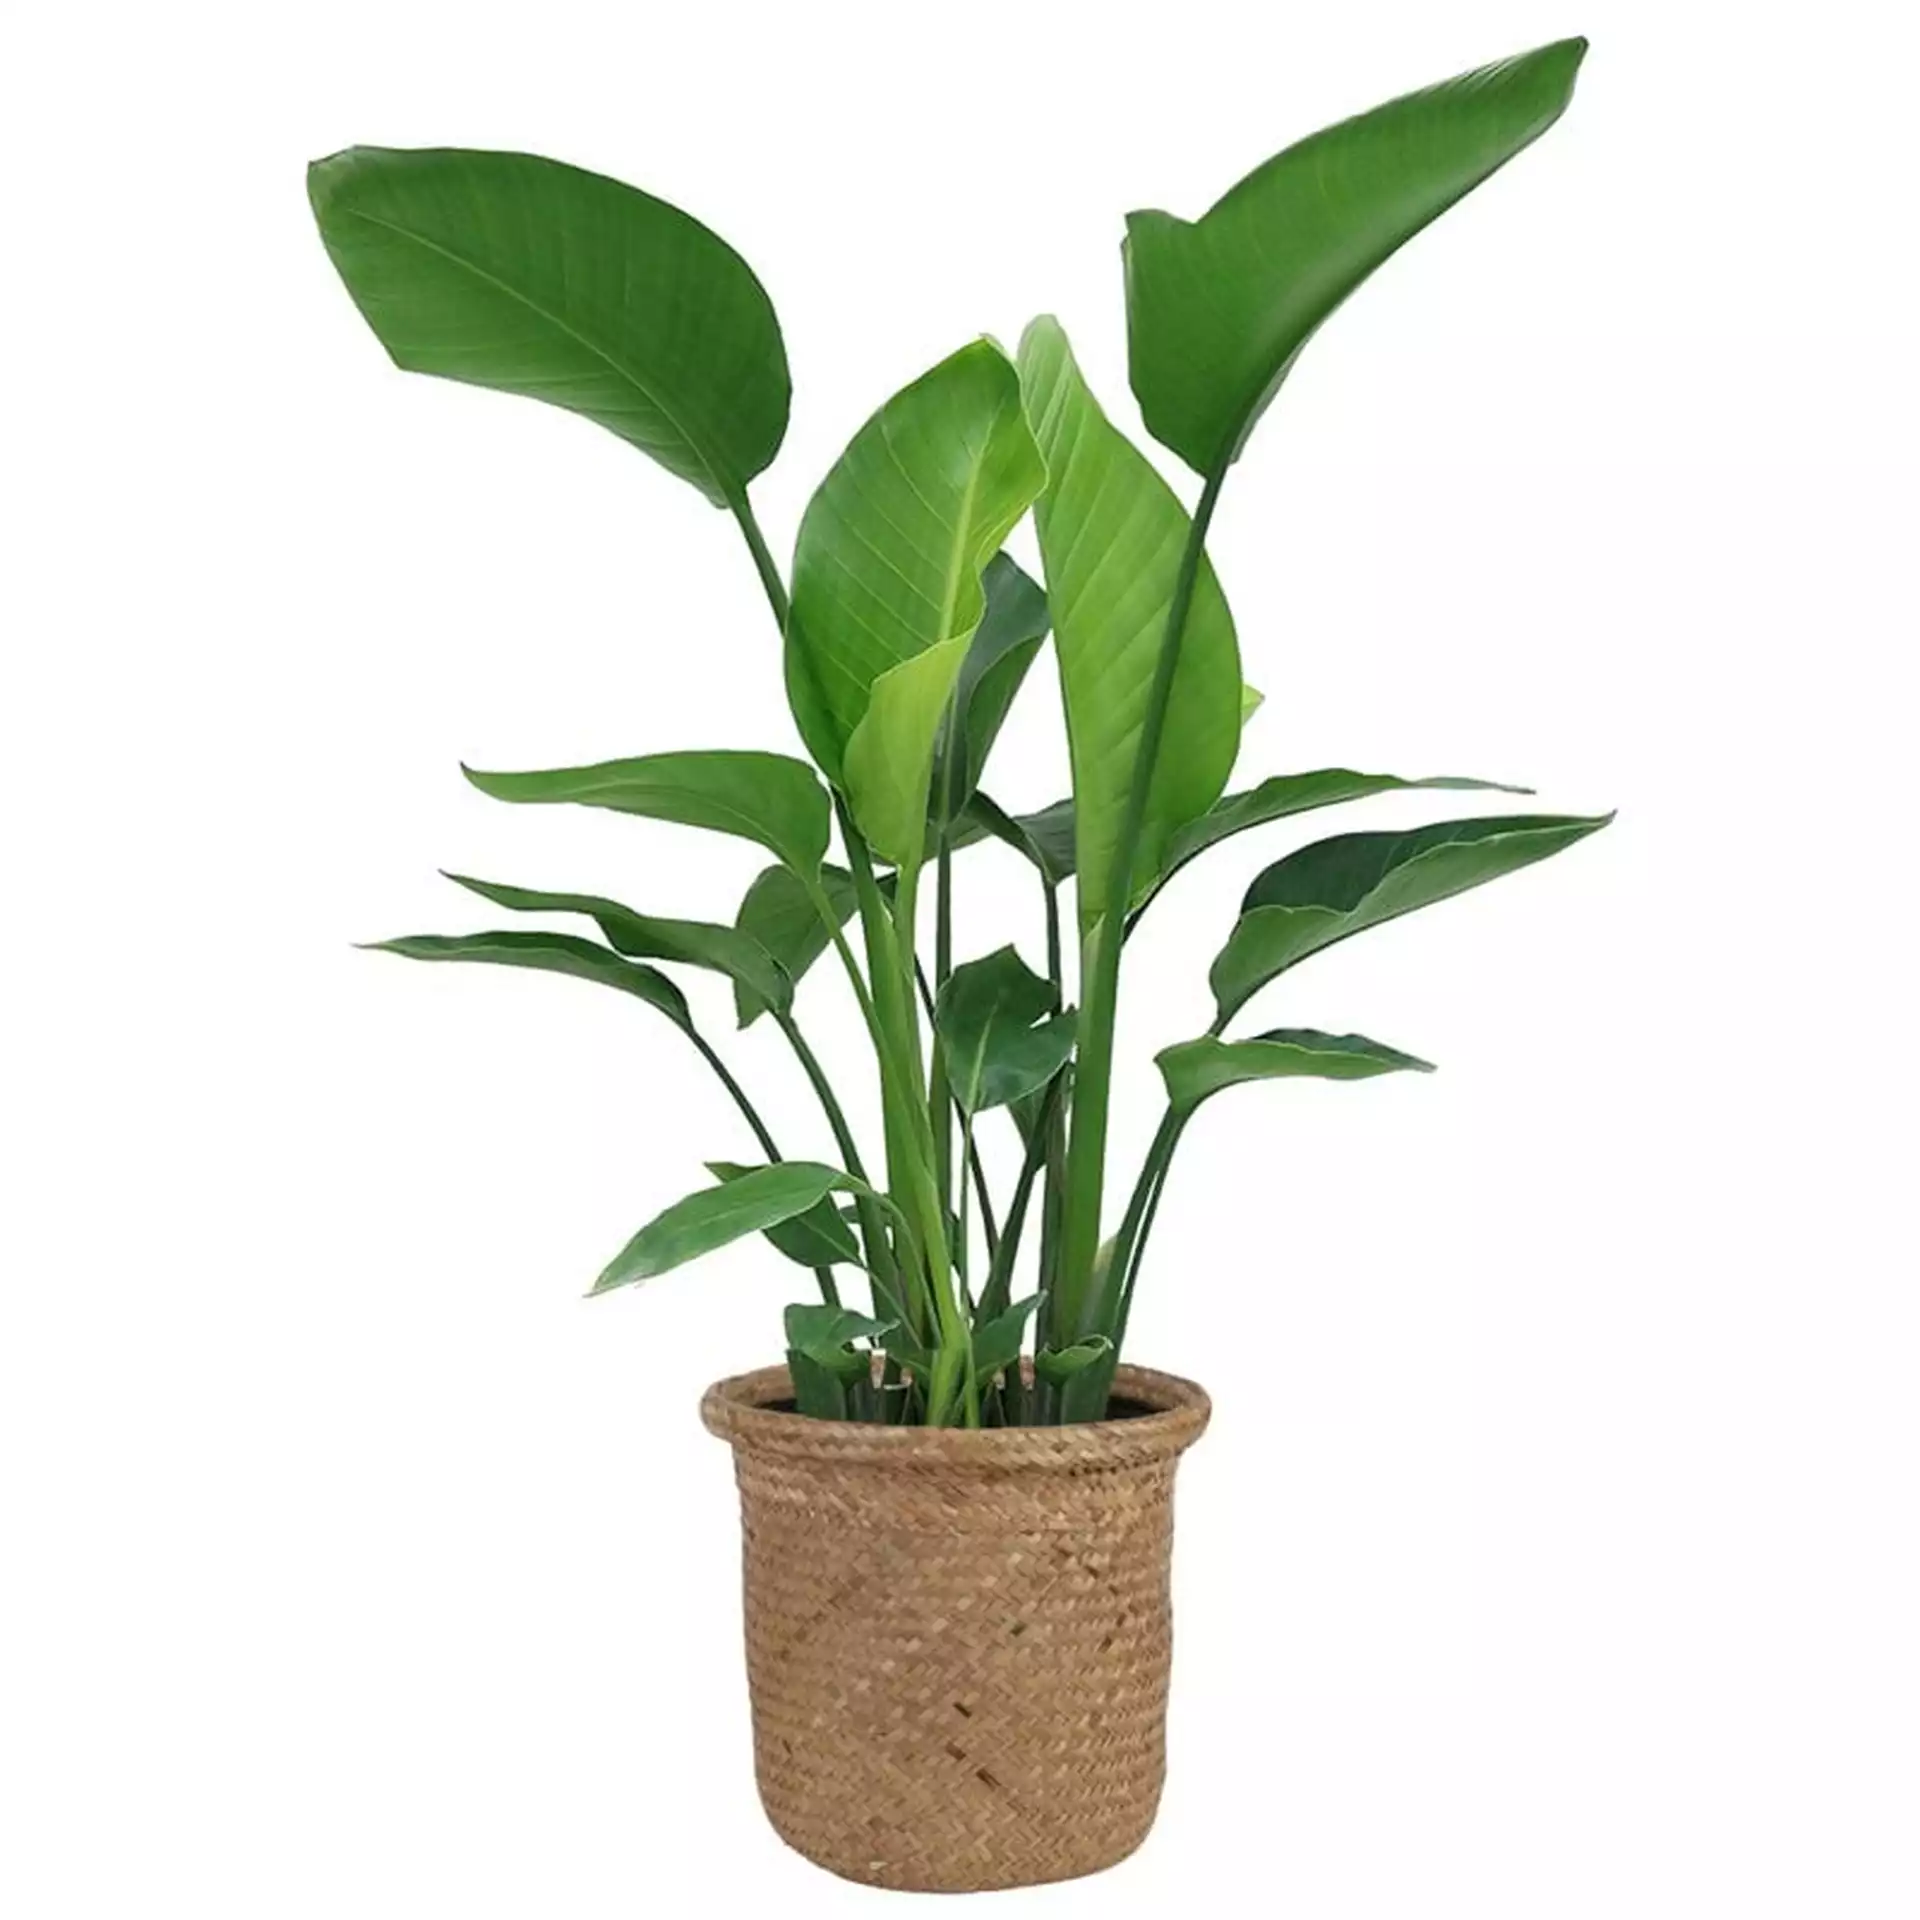 Costa Farms 24'' Plant Floor Plant in a Wicker & Rattan Basket, Outdoor Use